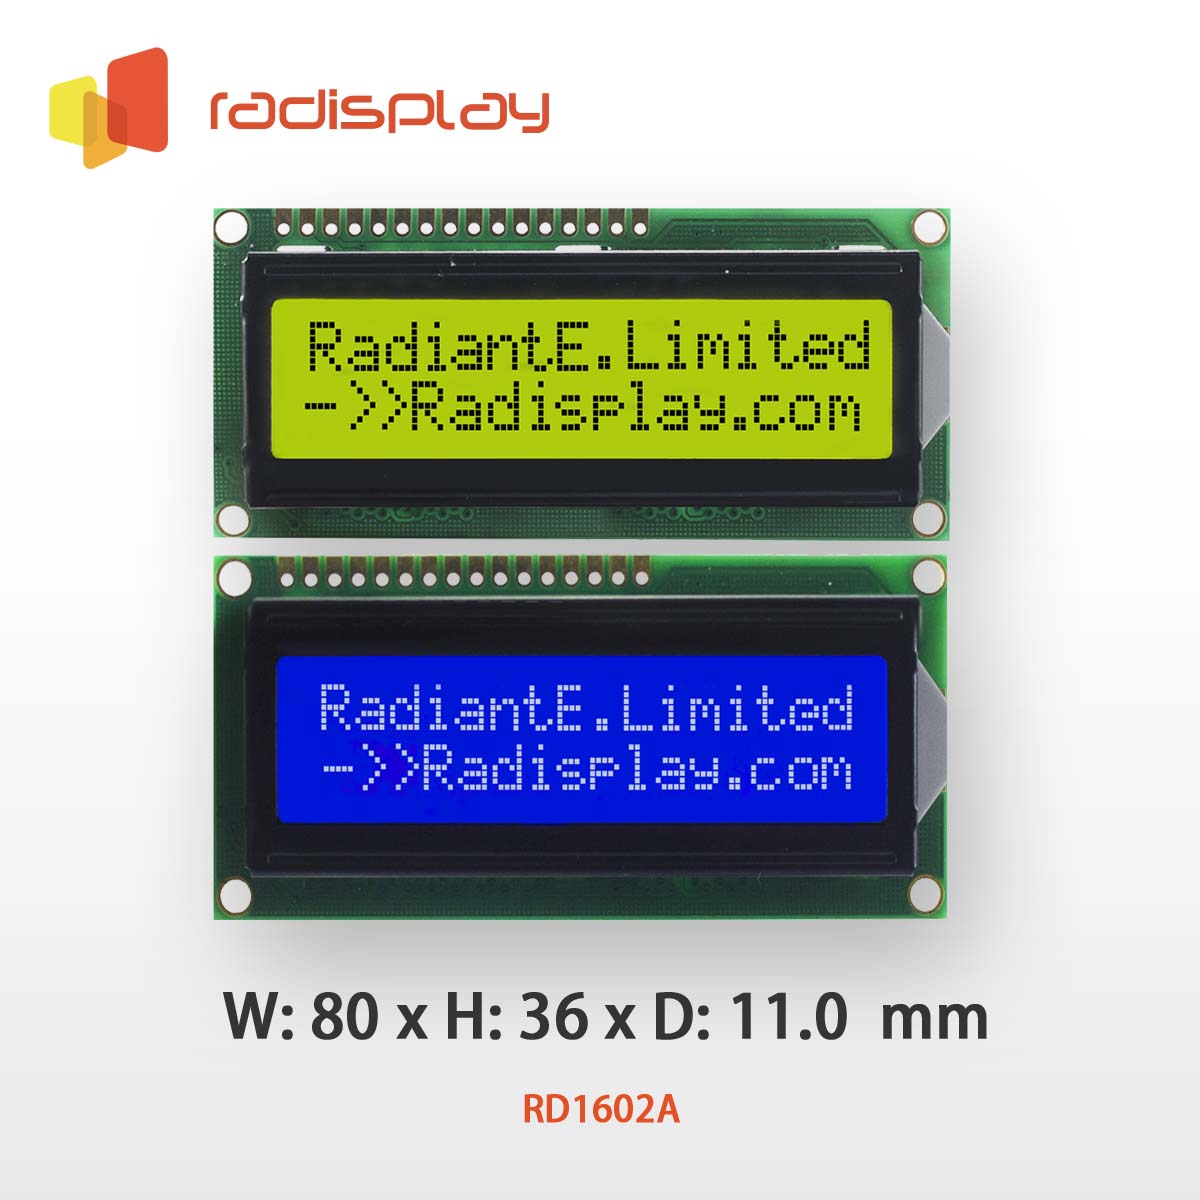 16x2 Character LCD Display Module (RD1602A-8)